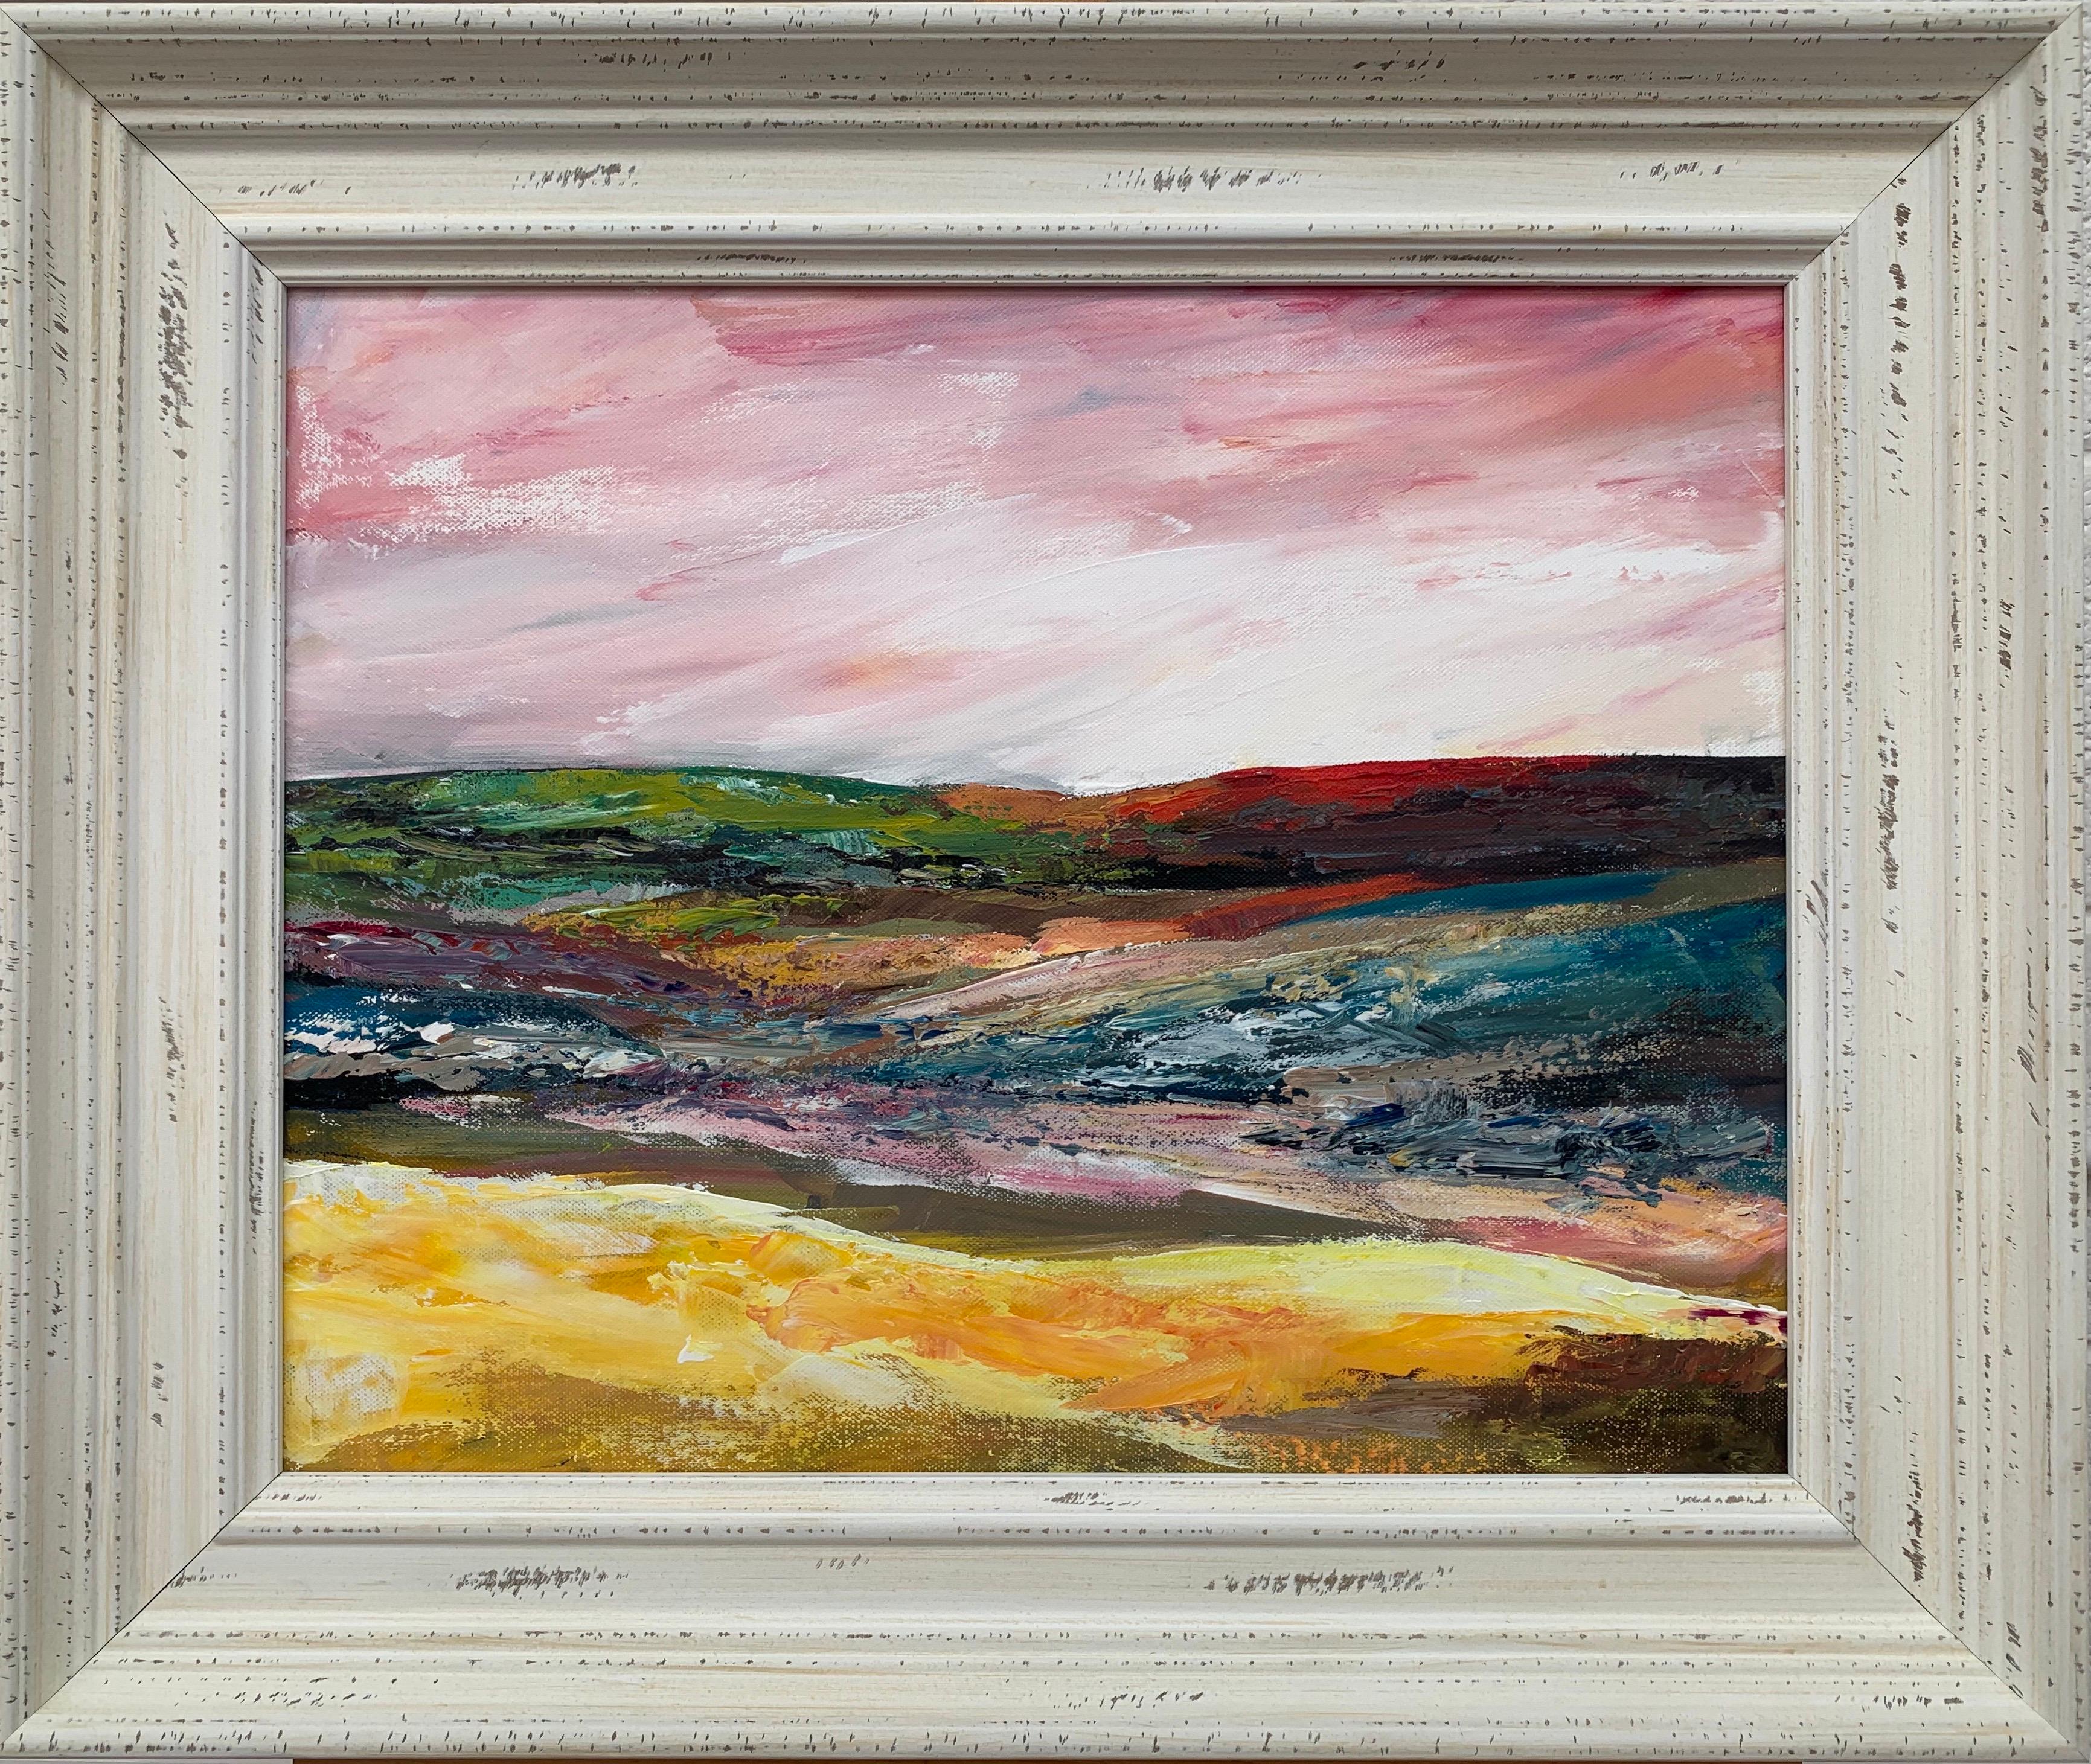 Colourful English Moor Landscape with Pink Sky by Contemporary British Artist